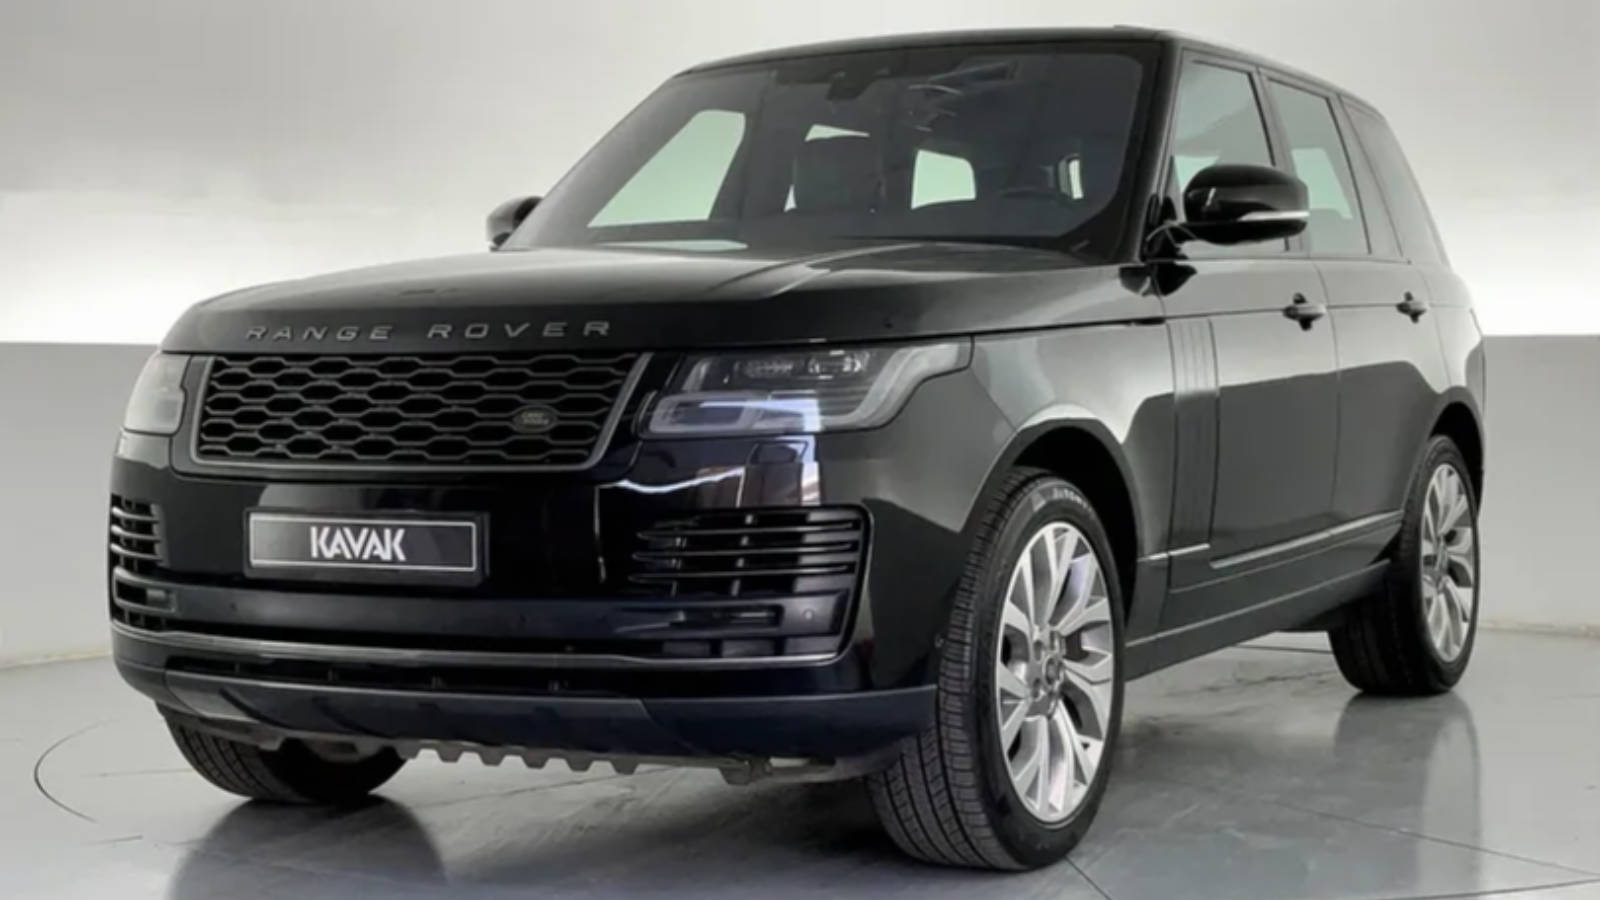 Land Rover Range Rover Review — The Definitive Luxury SUV